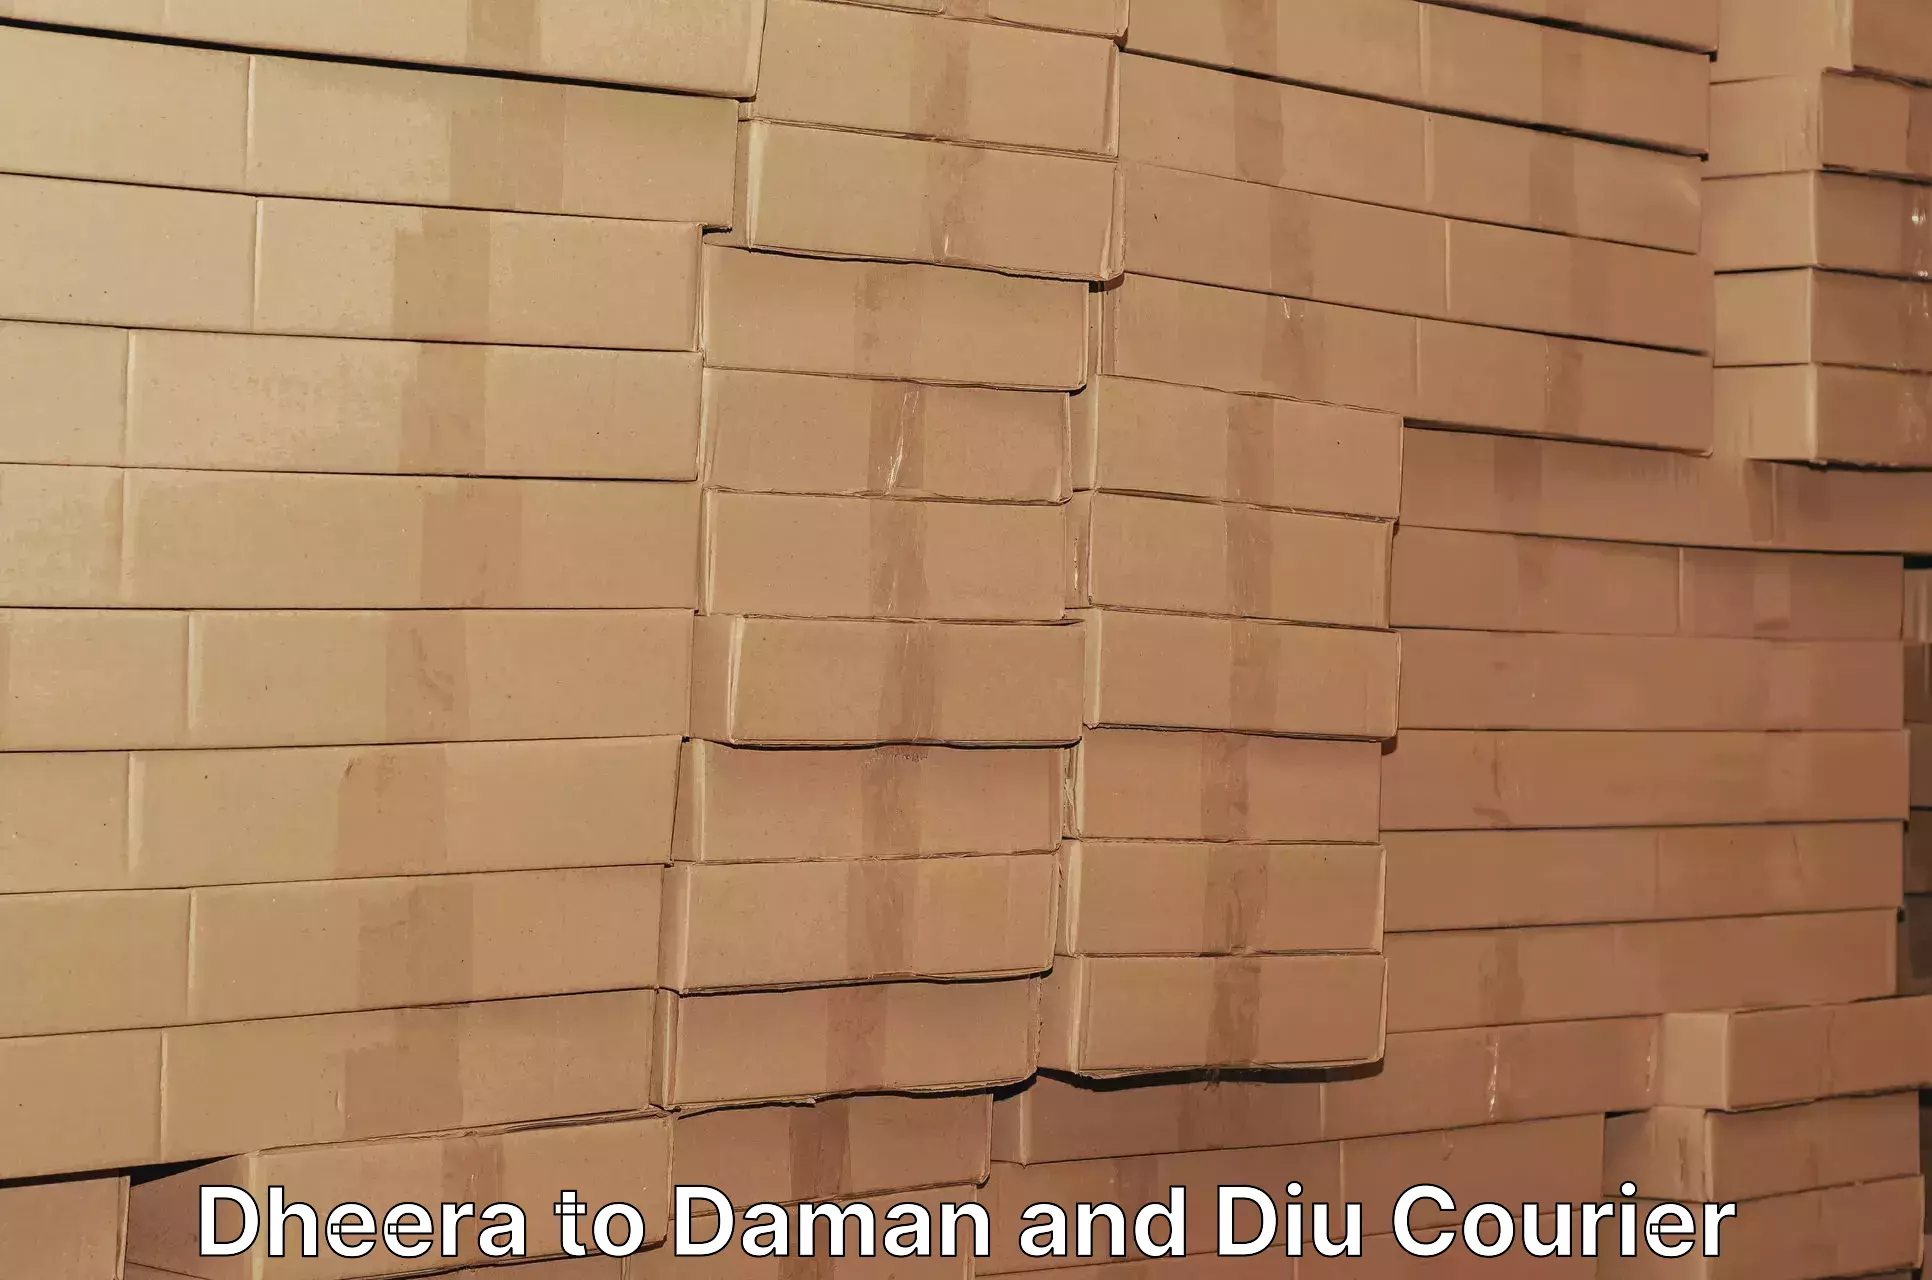 Courier service booking in Dheera to Daman and Diu